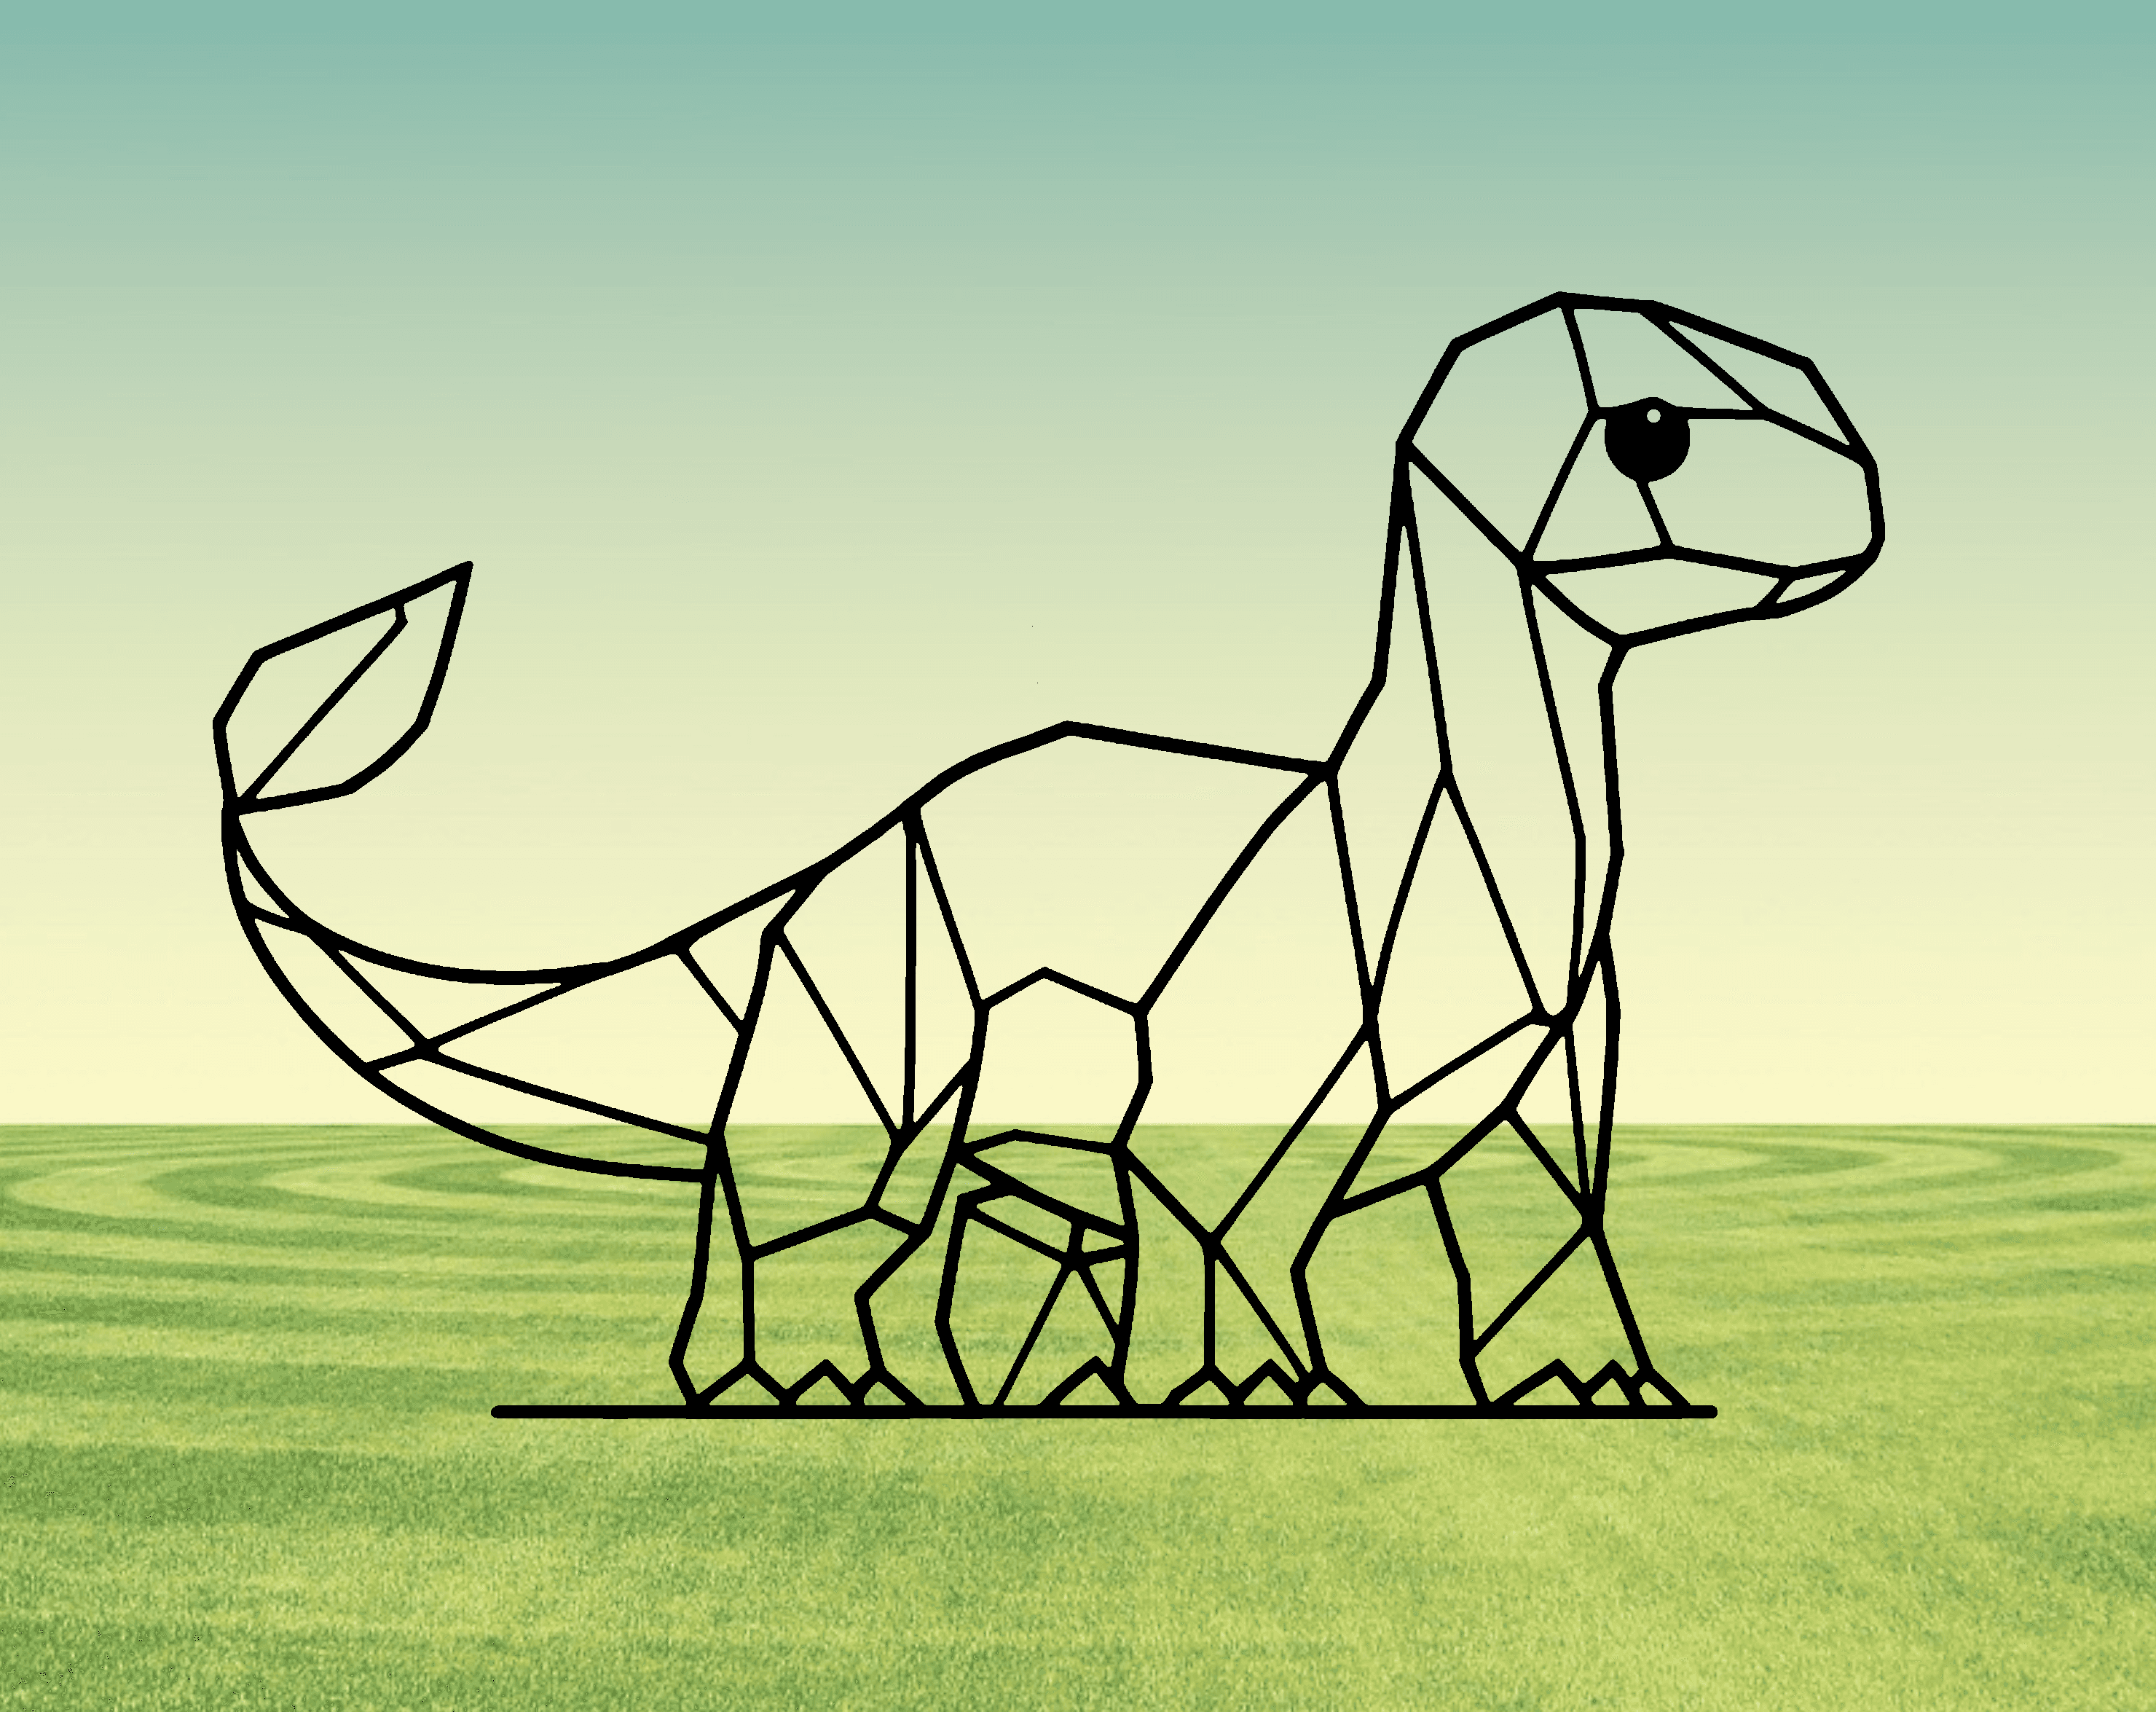 Geometric Littlefoot wallart from the land before time 3d model